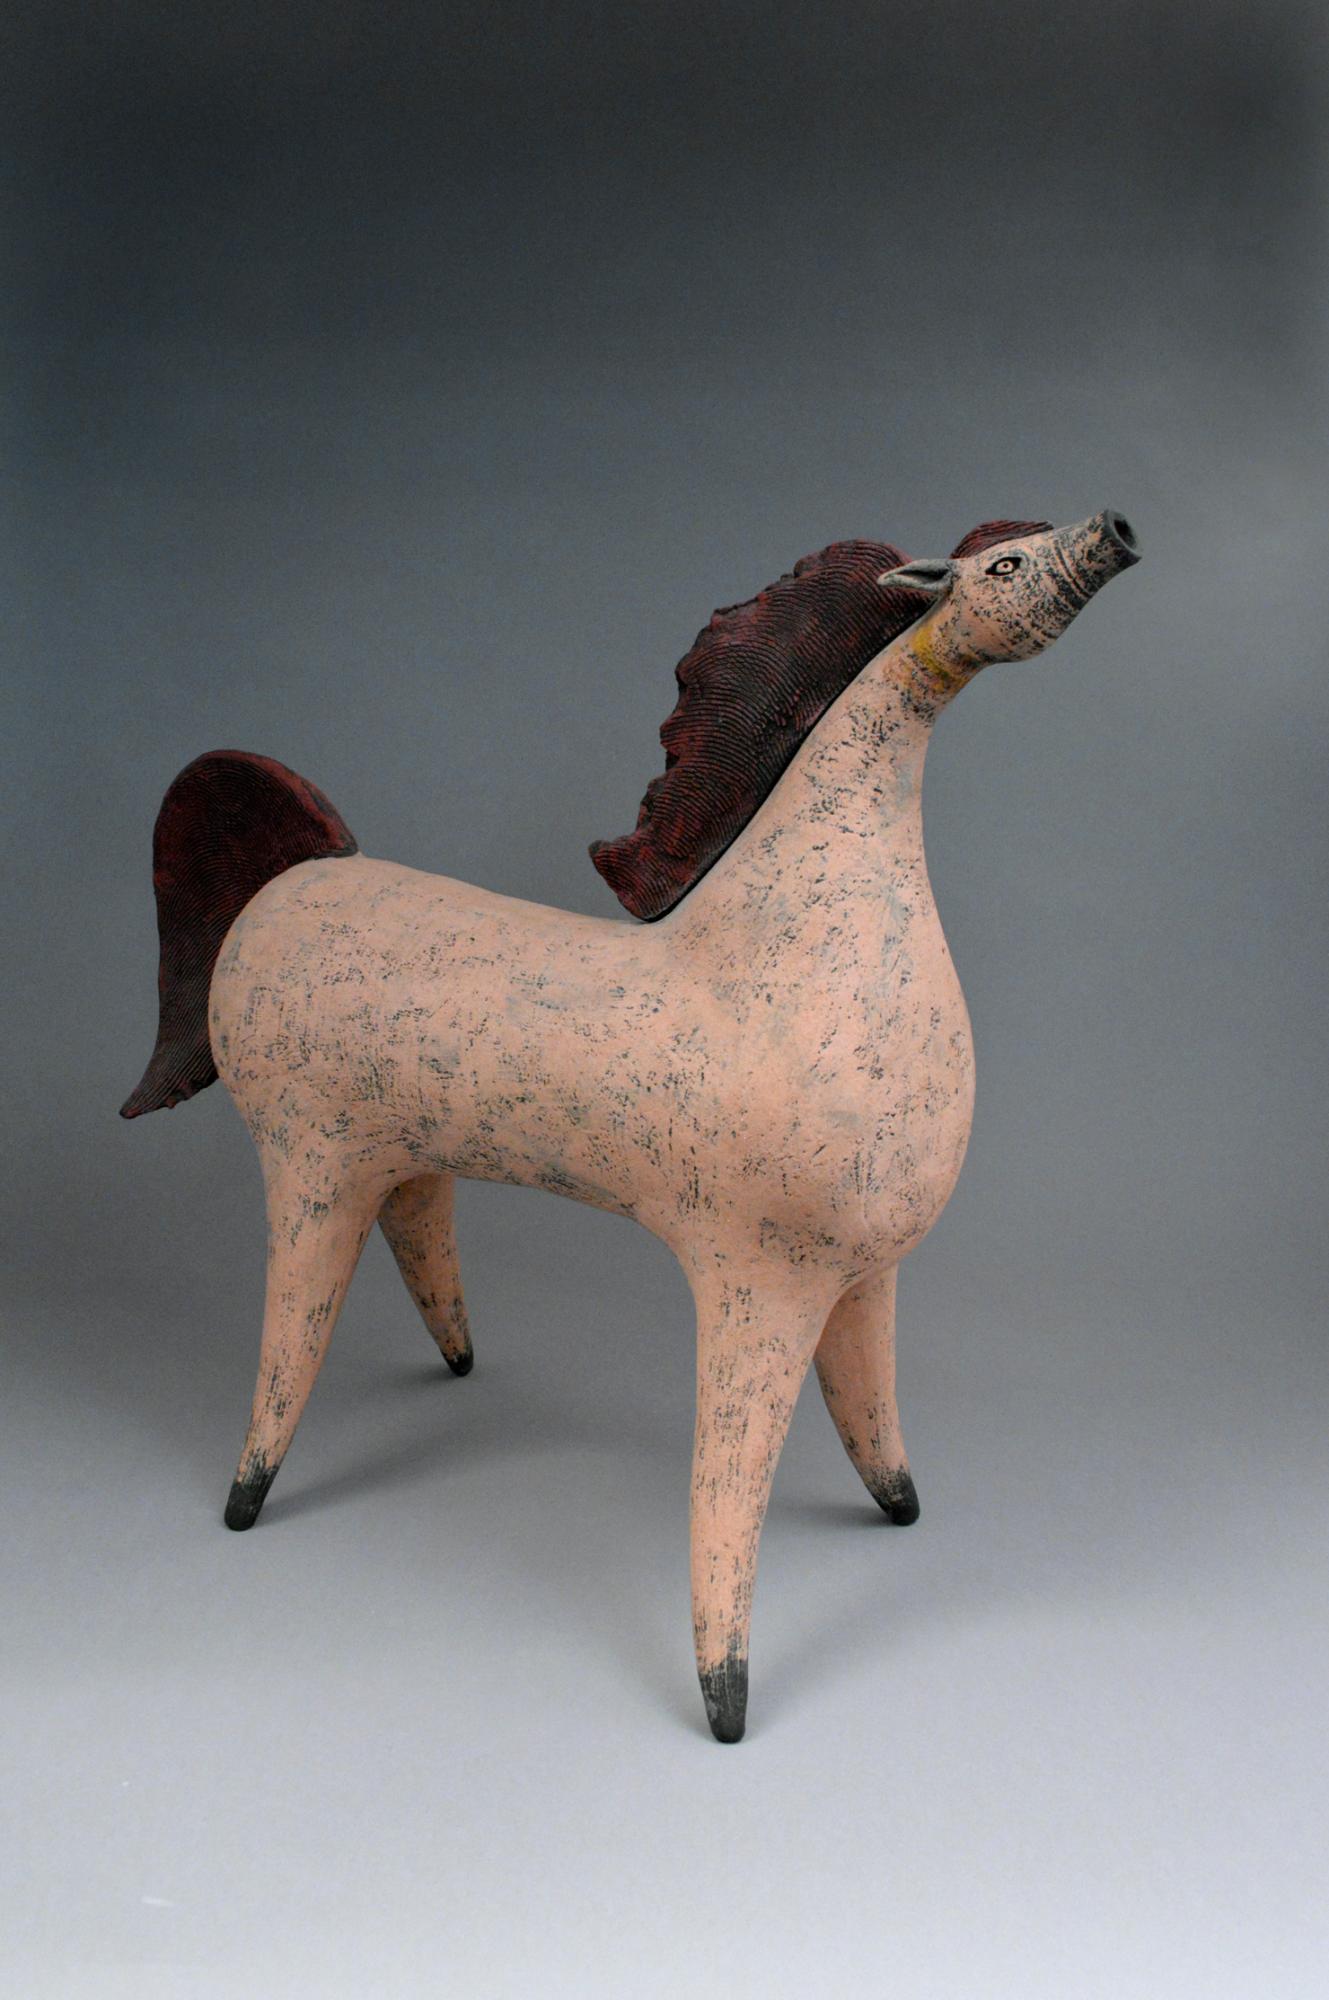 Small, stylized statue of a vigorous and whimsical horse, made of glazed and fired clay.